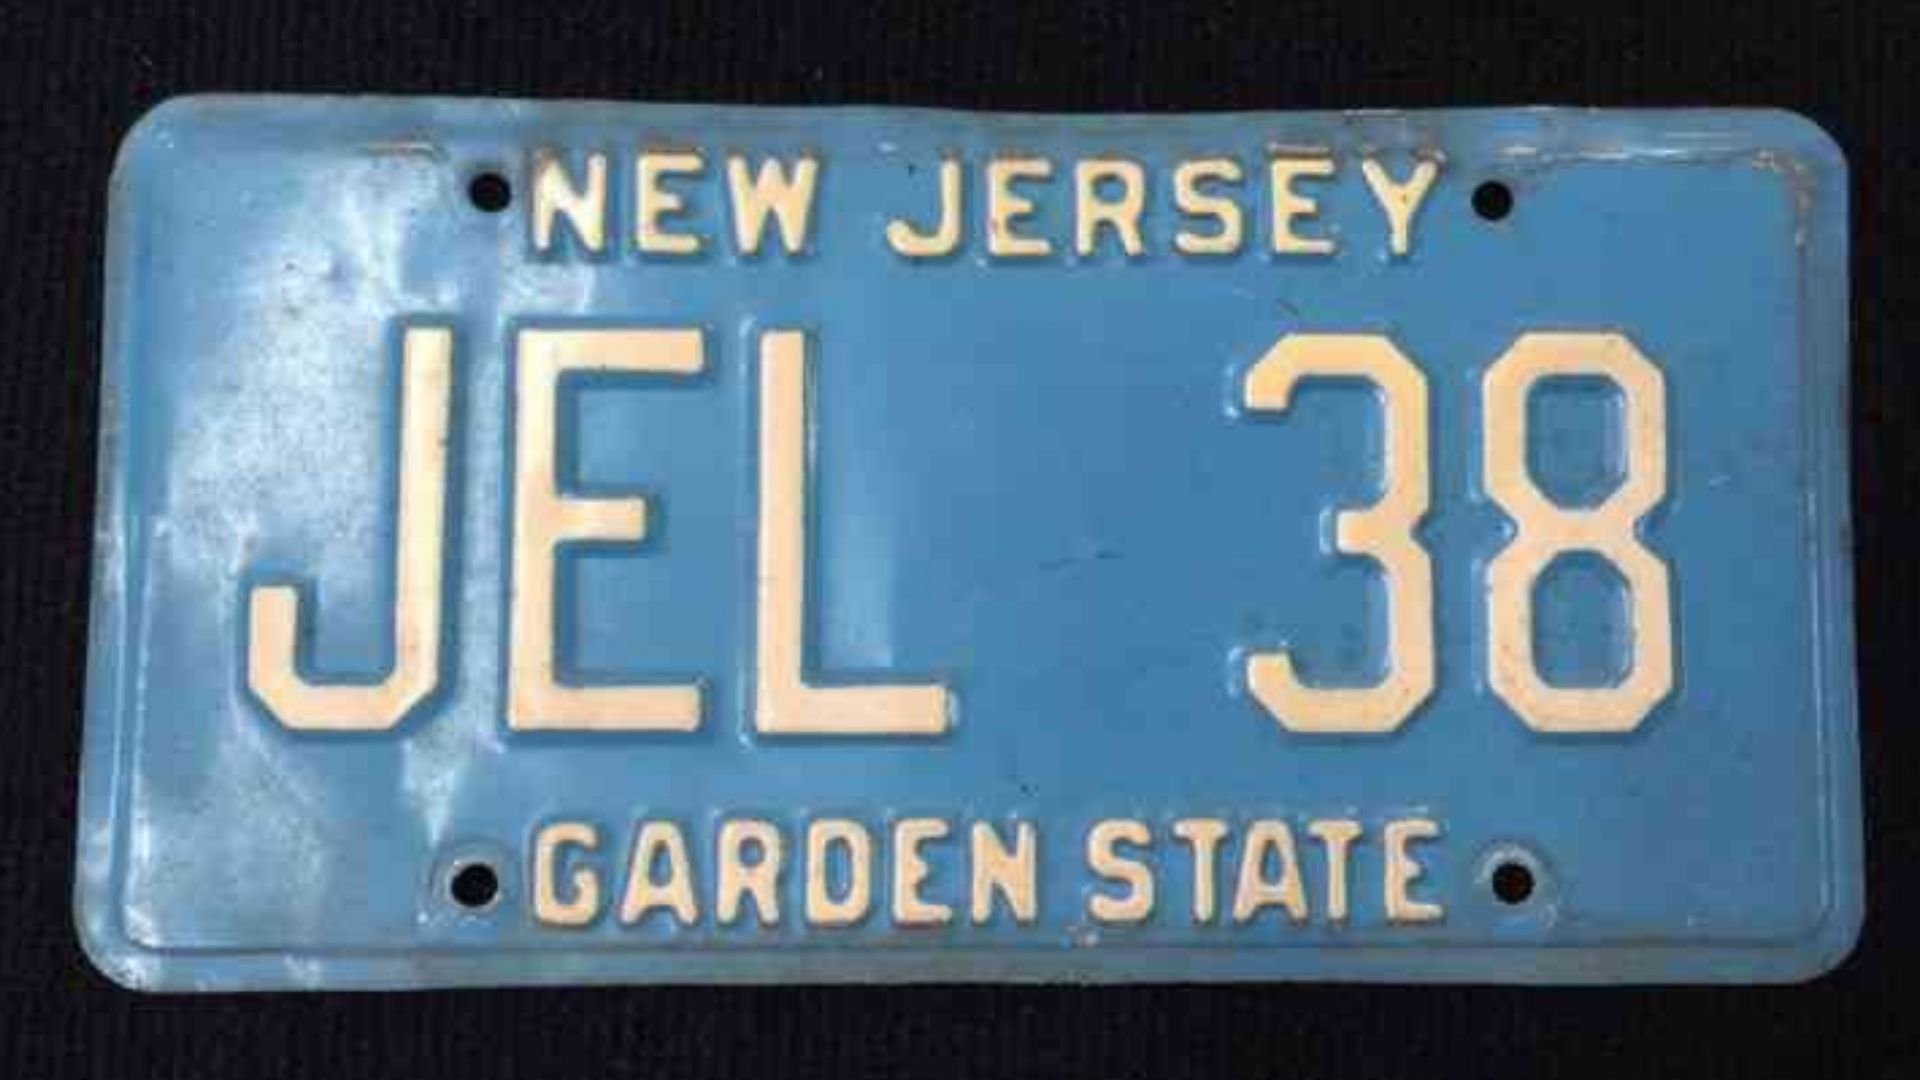 New Jersey To Introduce Vintage-Style License Plates